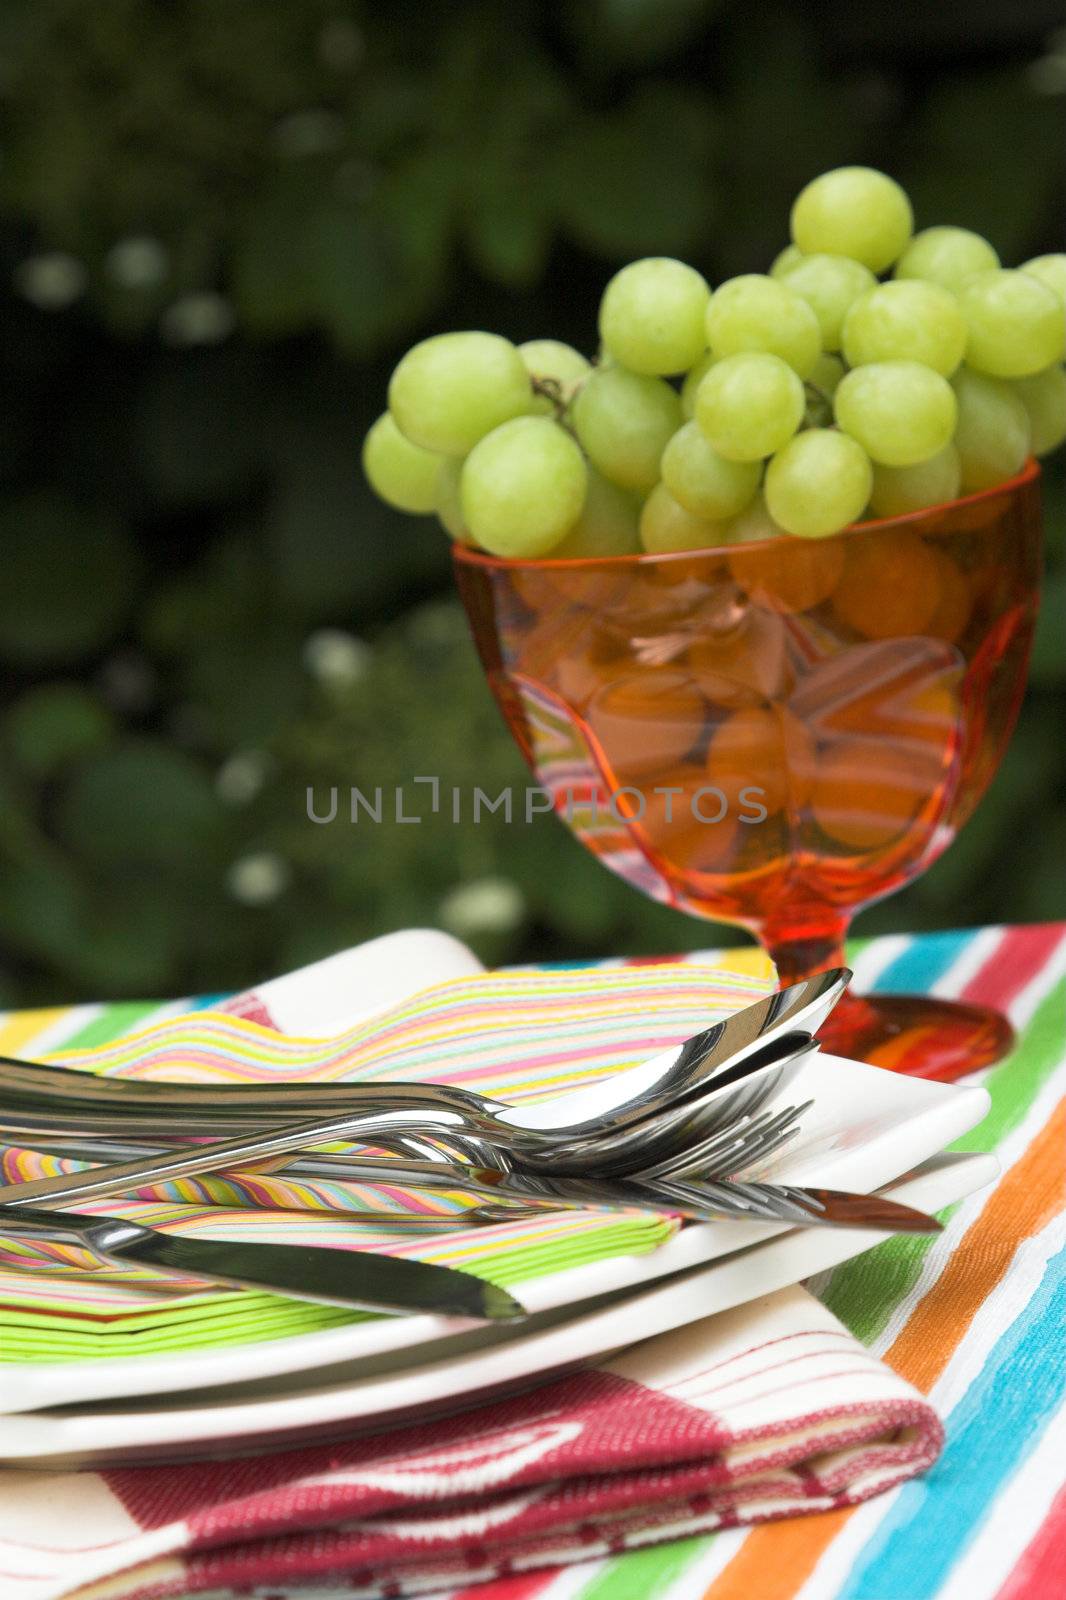 Outdoors setting for a table for two people (shallow dof, focus on cutlery)